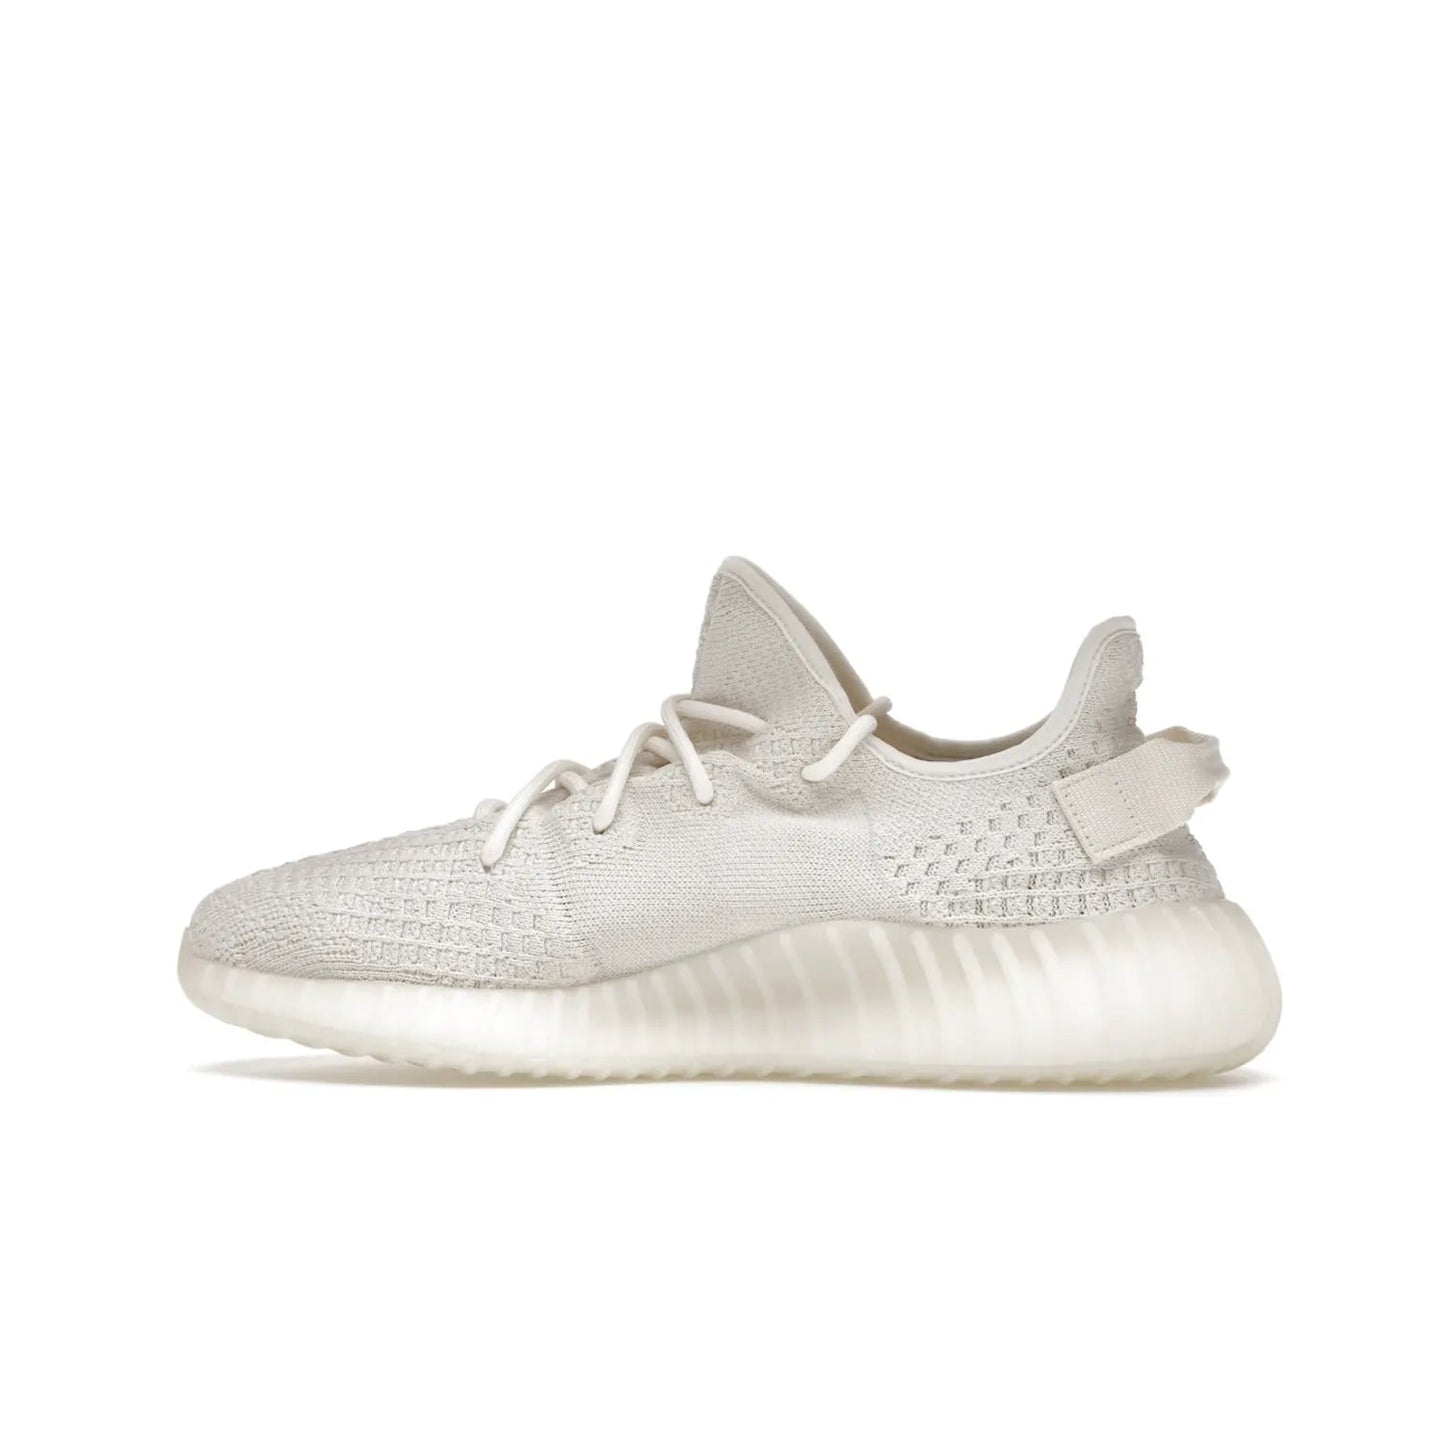 adidas Yeezy Boost 350 V2 Bone - Image 20 - Only at www.BallersClubKickz.com - Grab the stylish and comfortable adidas Yeezy Boost 350 V2 Bone in March 2022. This sneaker features a triple white Primeknit upper, mesh side stripes and canvas heel tabs, sitting atop a semi-translucent sole with Boost technology. Sure to keep your feet comfortable and stylish!